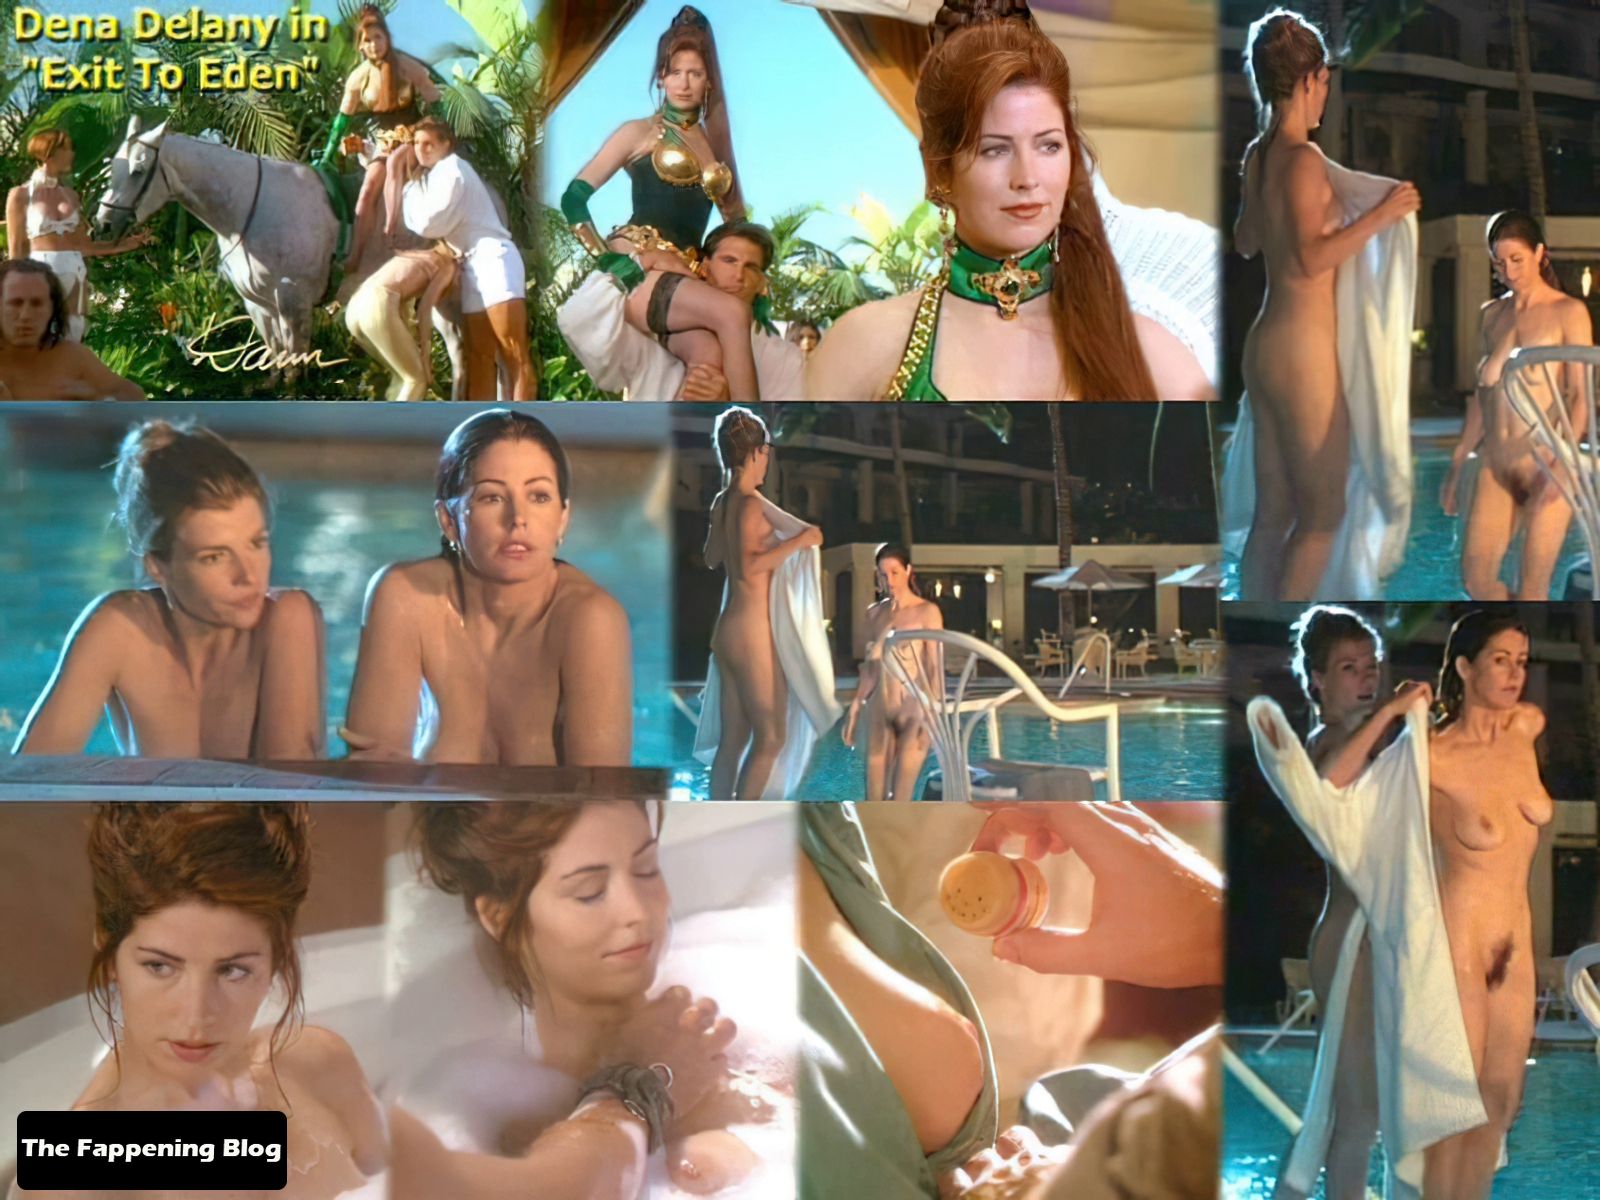 Dana-Delany-Nude-Collection-3-thefappeningblog.com_.jpg